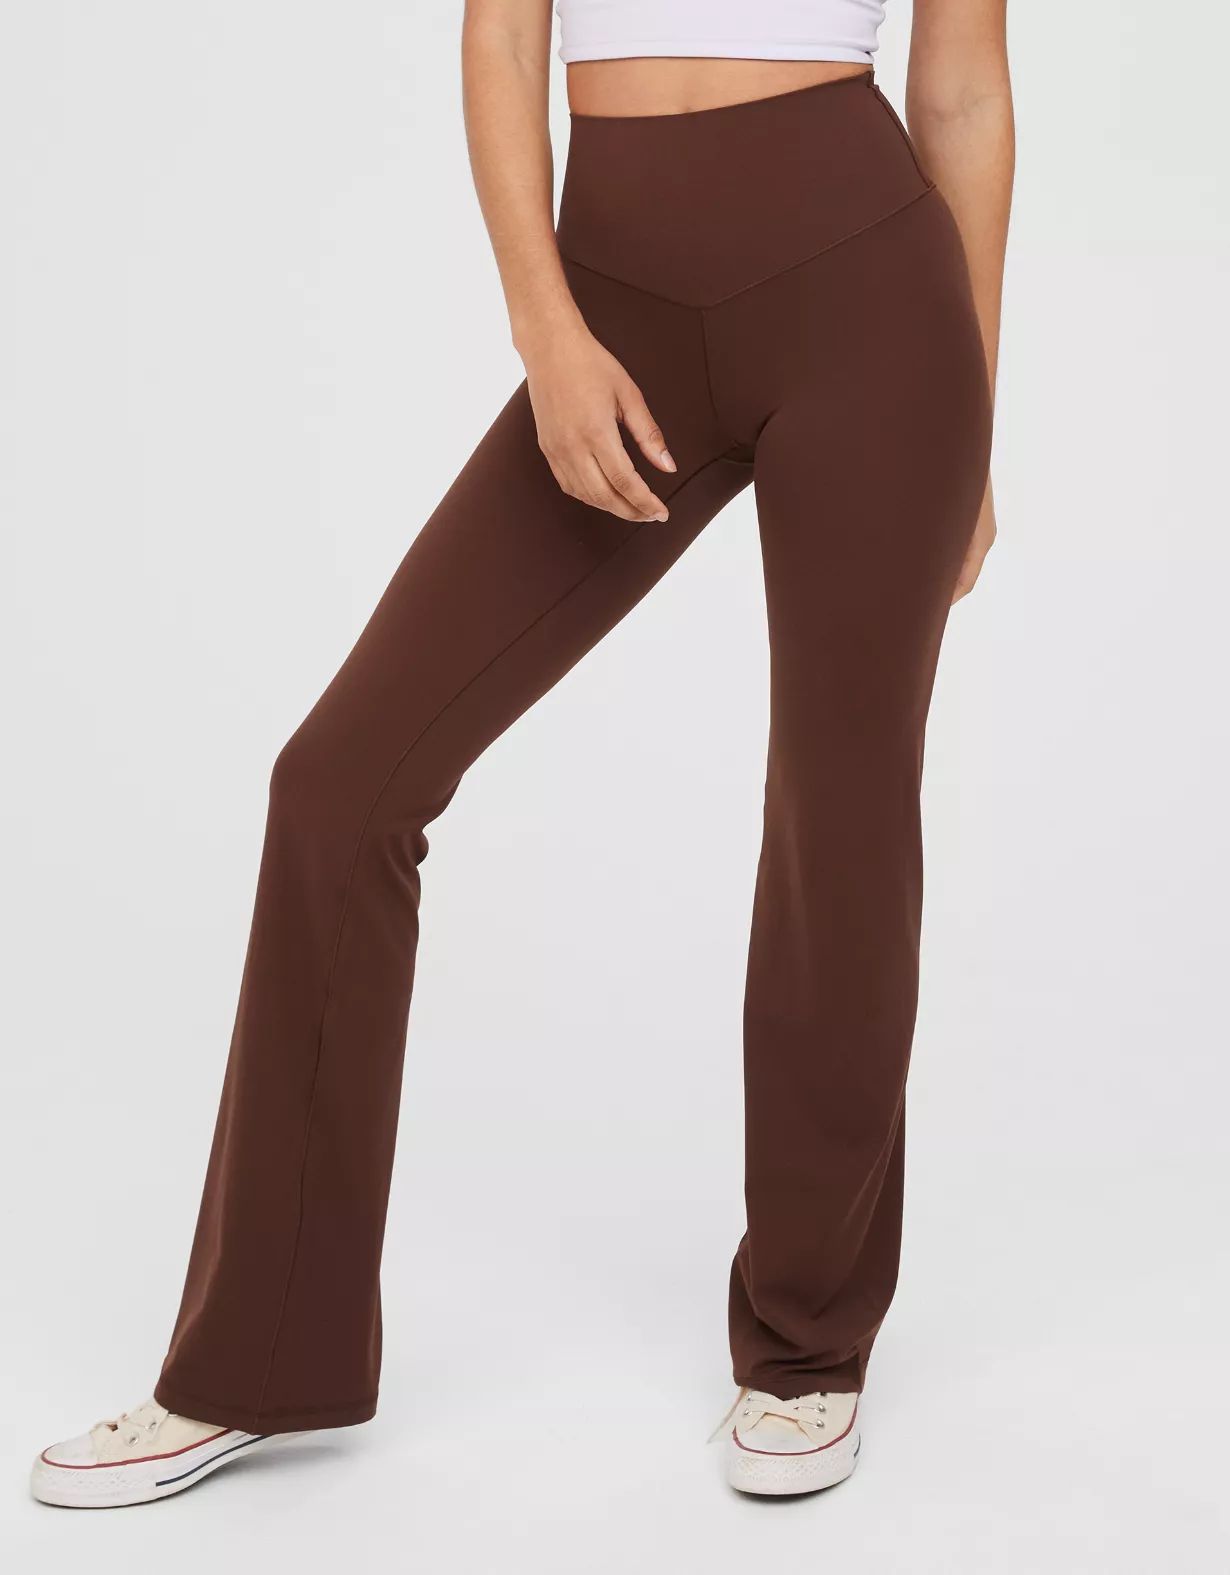 OFFLINE By Aerie Real Me Xtra Bootcut Legging | Aerie